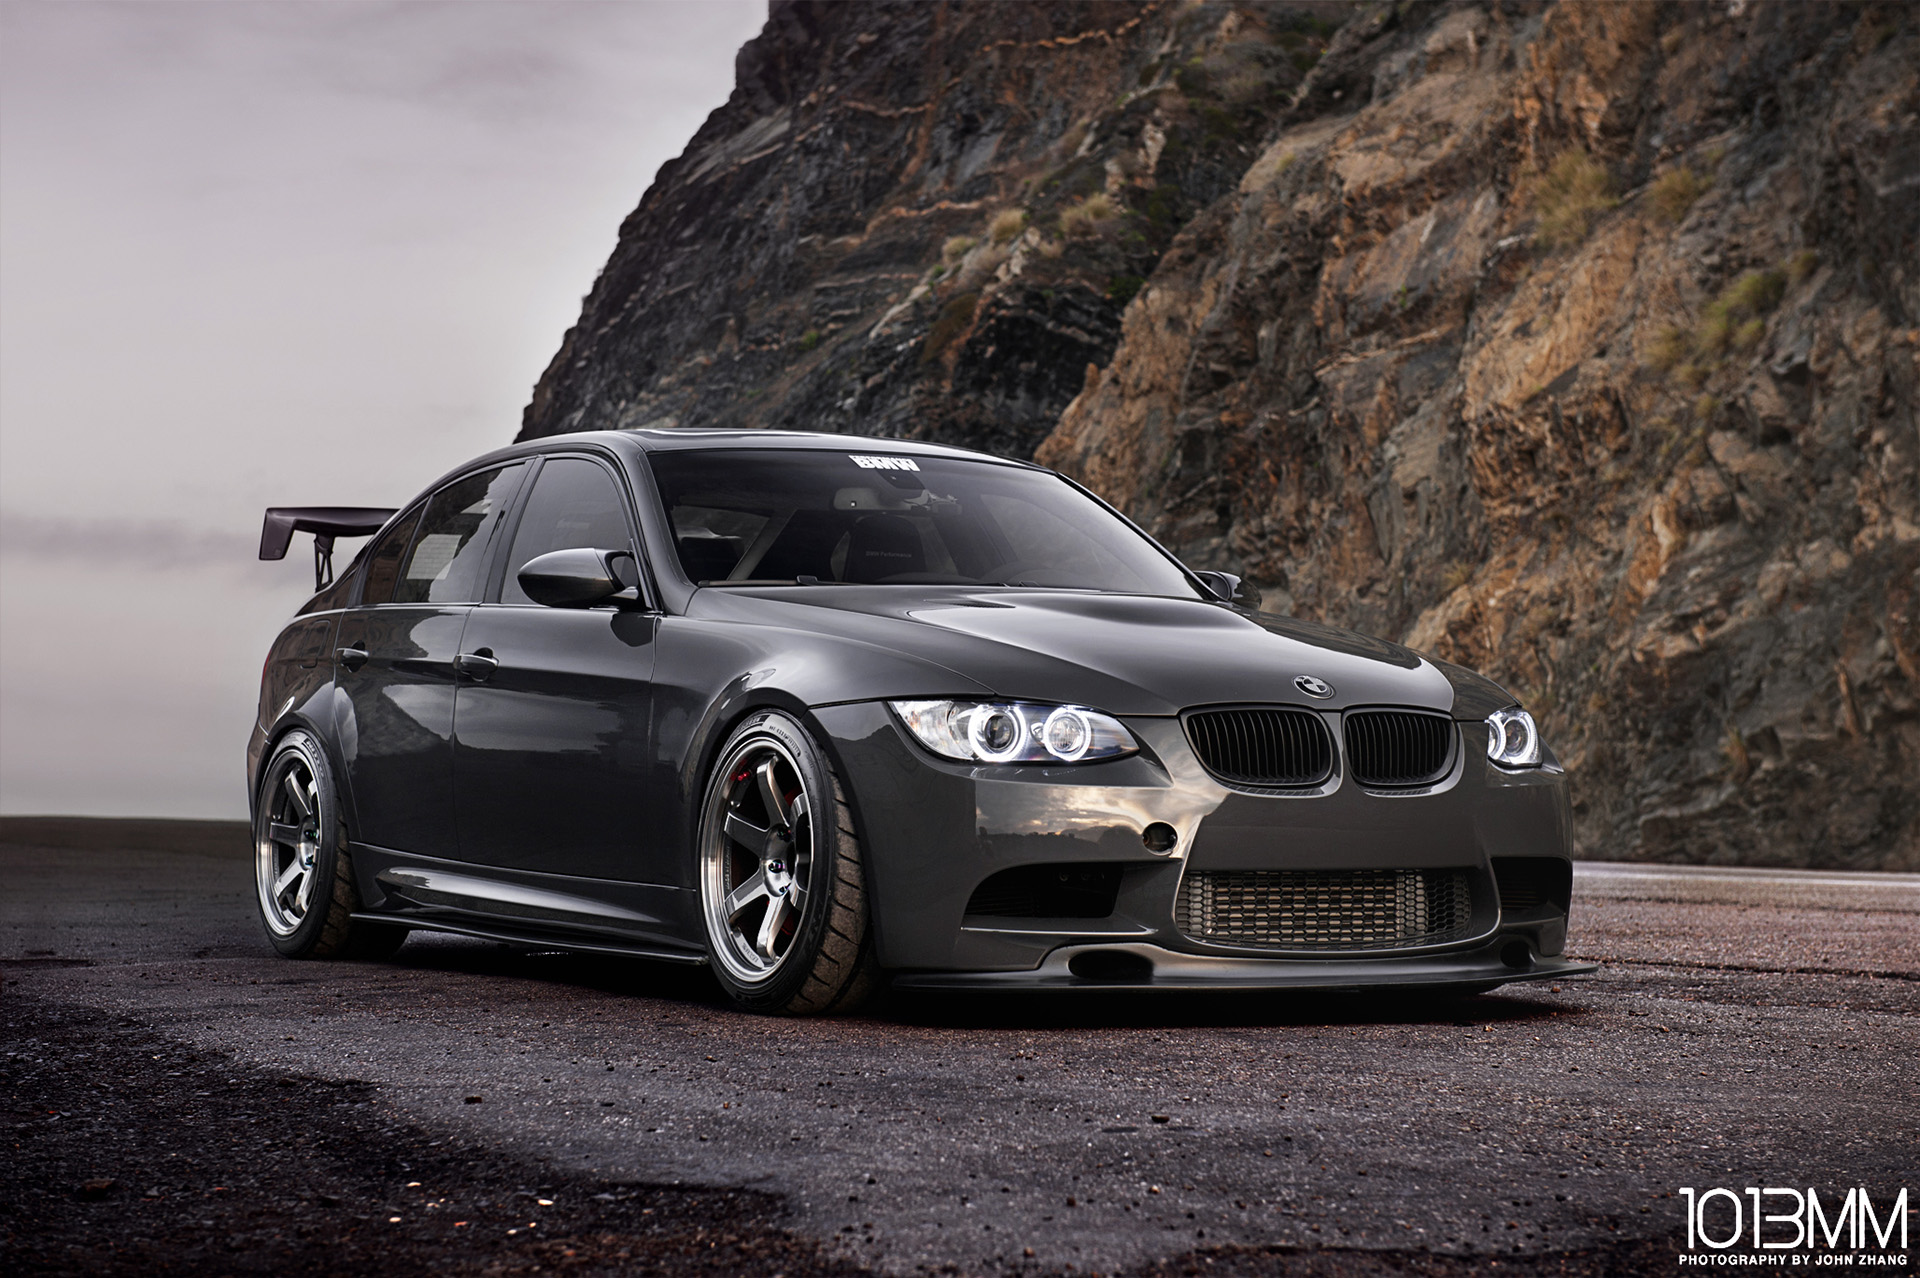 Track Day Ready Bmw E90 Lci 335i By 1013mm Photography